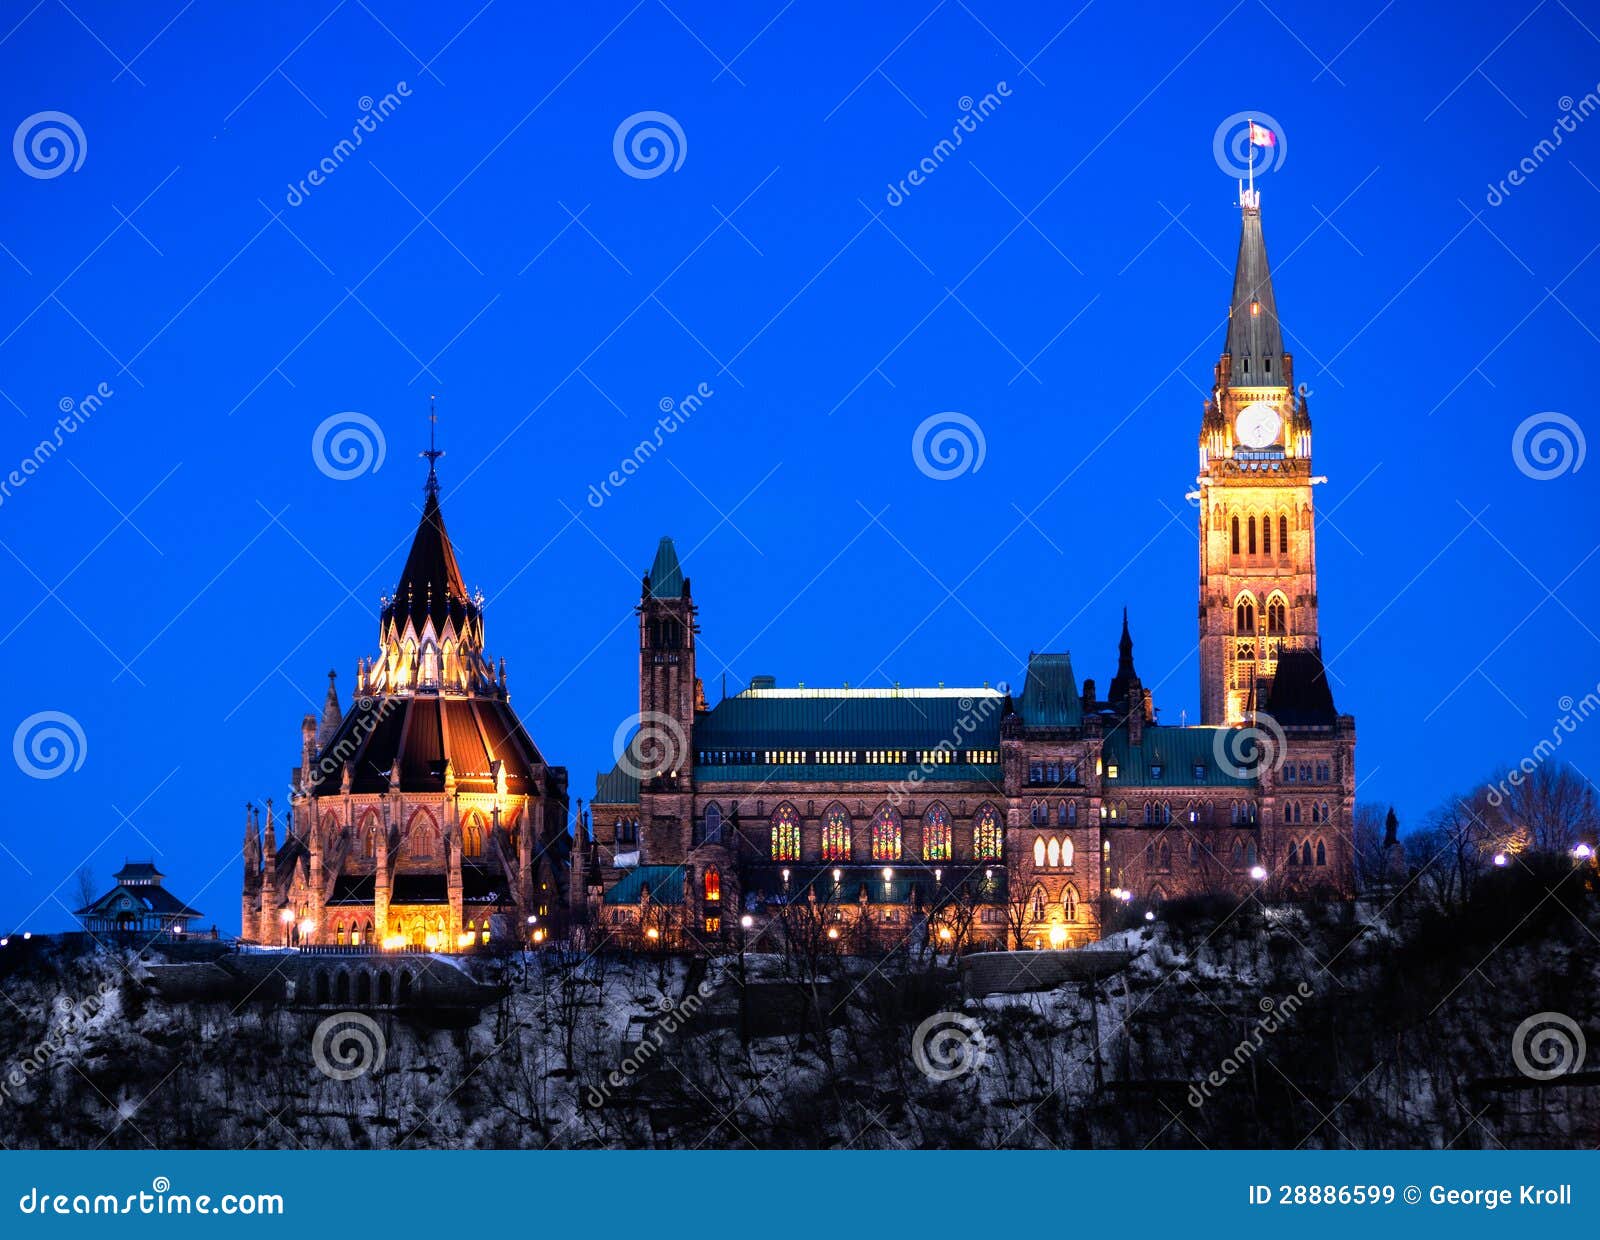 ottawa parliament buildings viewed from west side